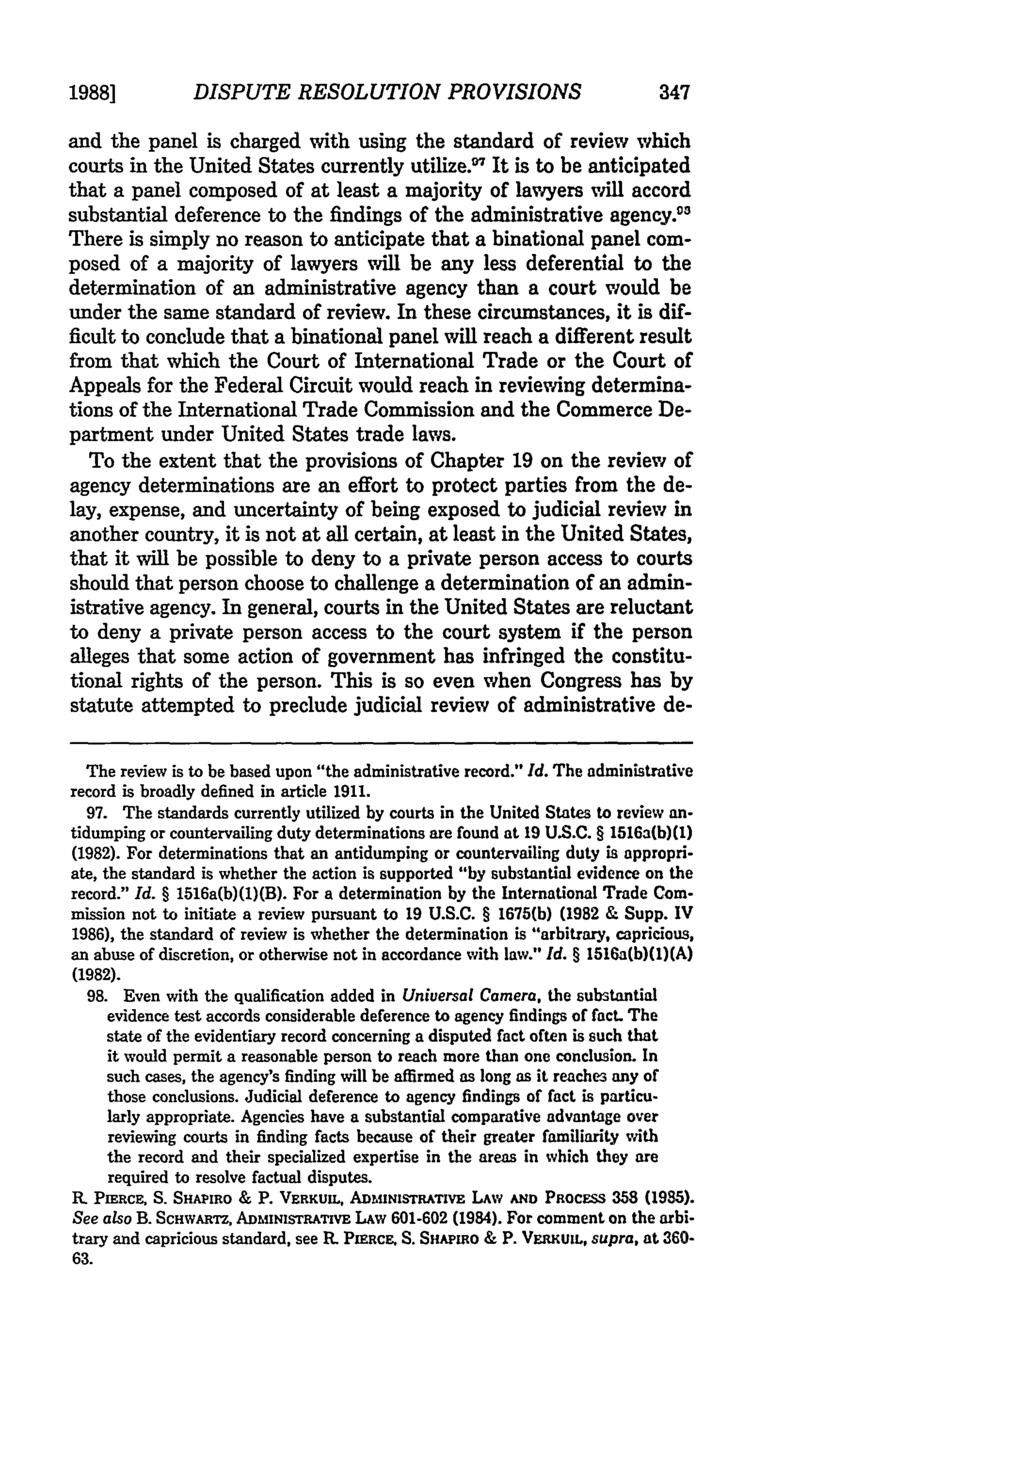 1988] DISPUTE RESOLUTION PROVISIONS and the panel is charged with using the standard of review which courts in the United States currently utilize.